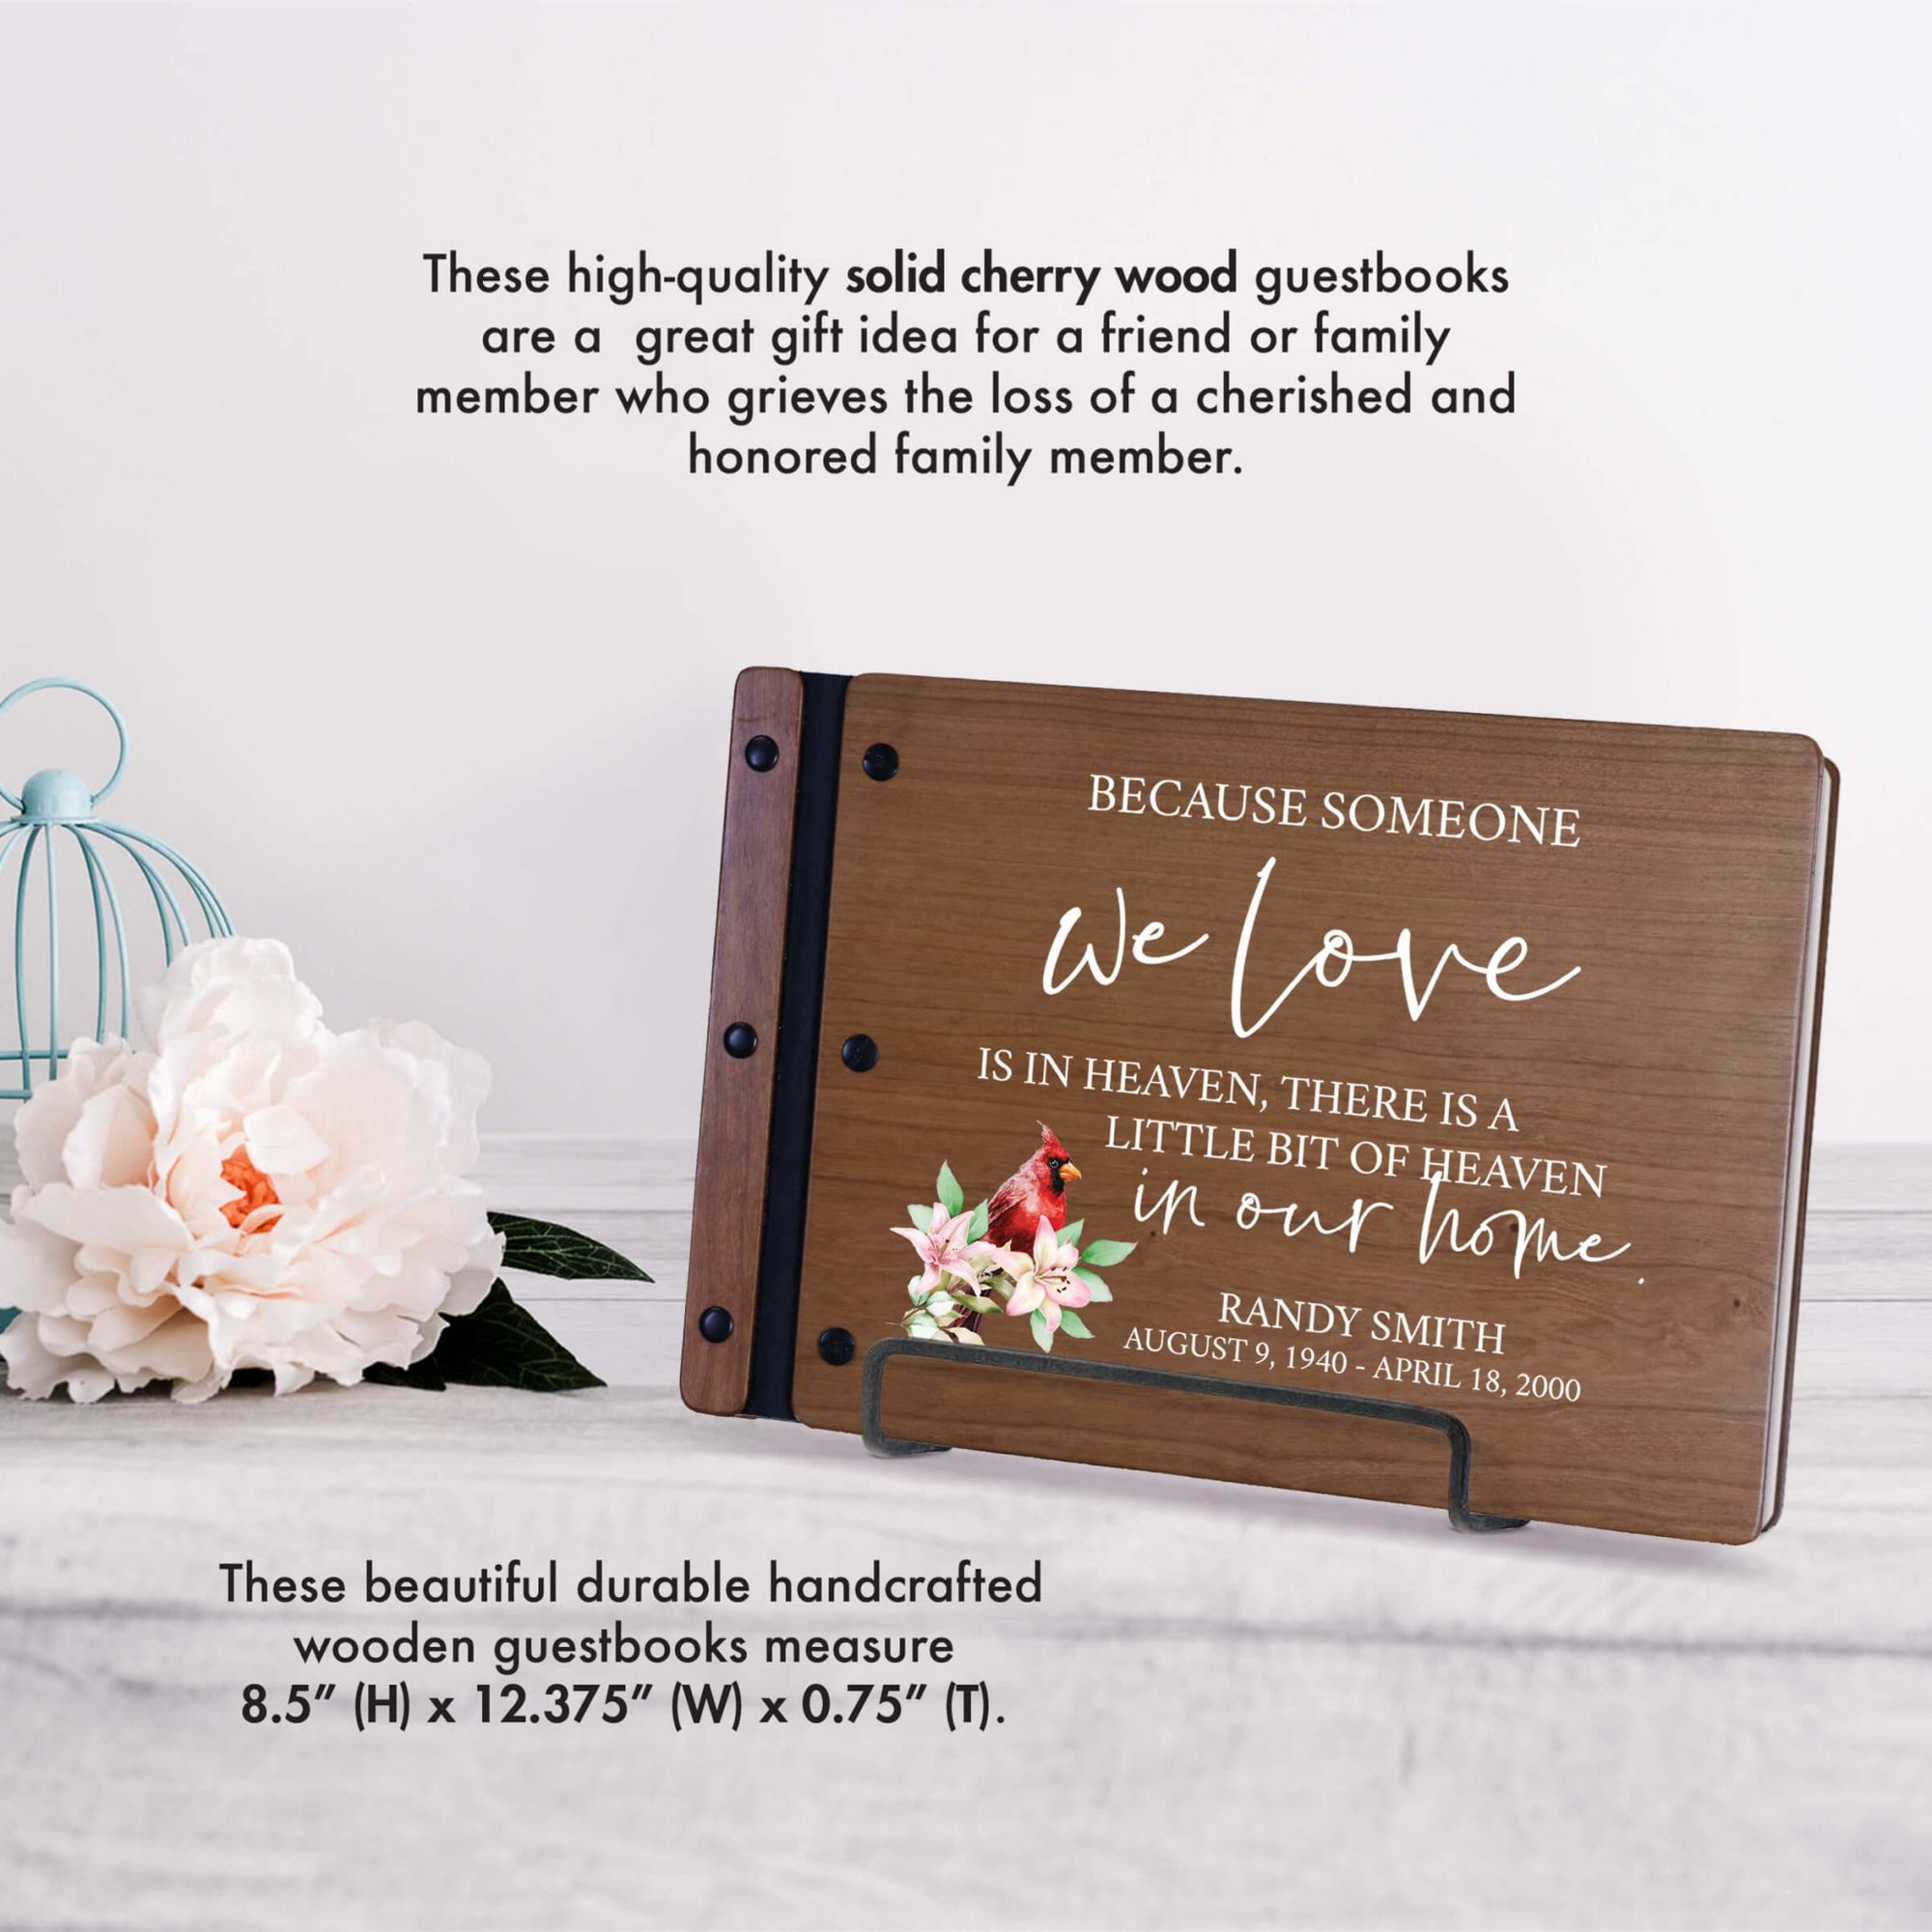 Personalized Funeral Wooden Guestbook for Memorial Service - Because Someone We Love - LifeSong Milestones